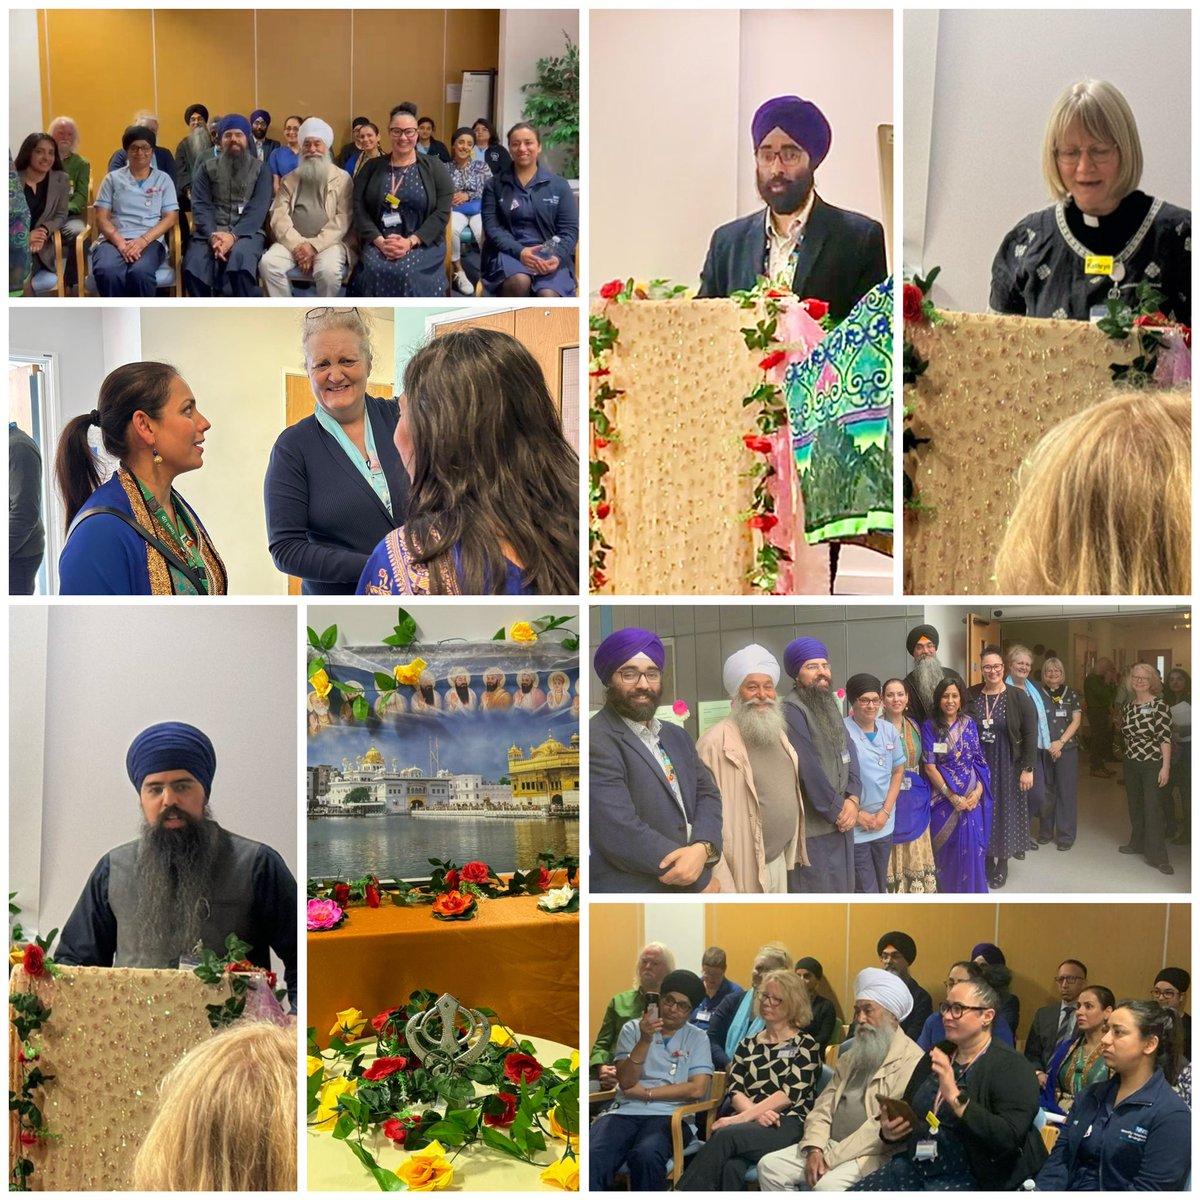 Delighted to present @uhbtrust #Vaisakhi celebration event, marking the #Sikh festival with #Chaplains, staff & senior leaders. Respecting diversity is at the heart of the #NHS. Genuinely moved to connect with a medic whose father I had supported @Leic_hospital @Leic_Chaplaincy